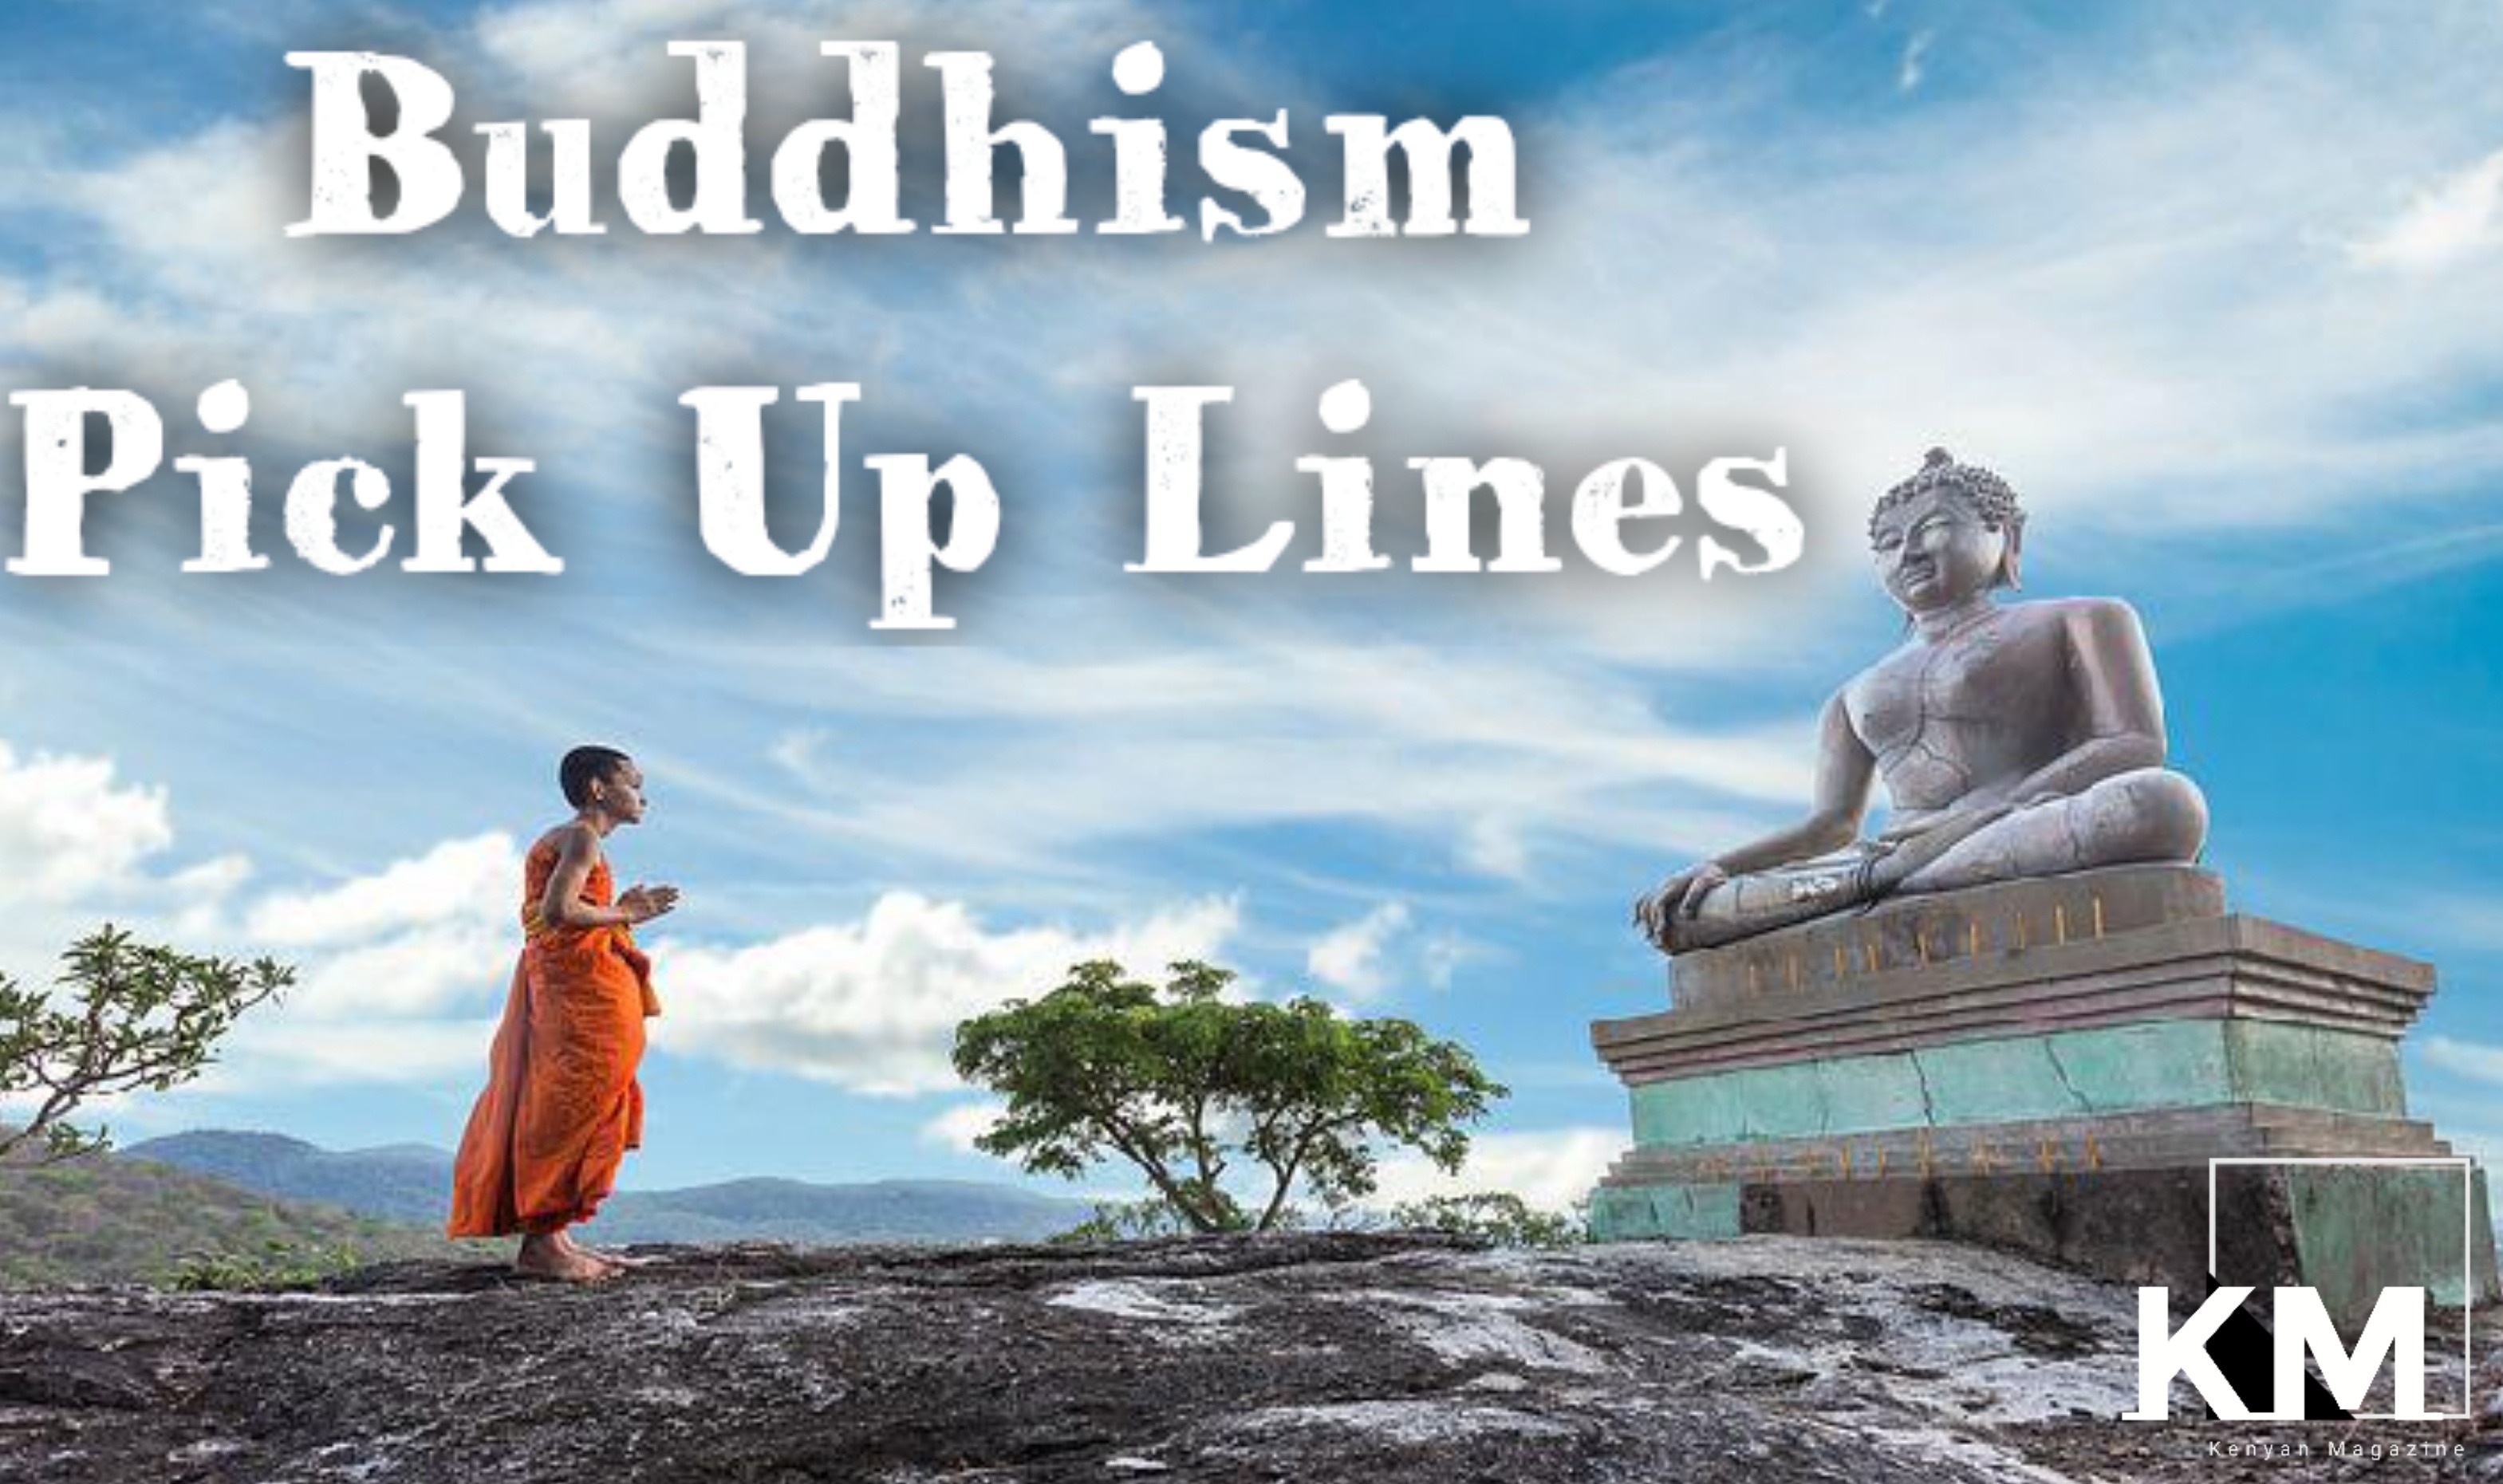 Buddhism pick up lines